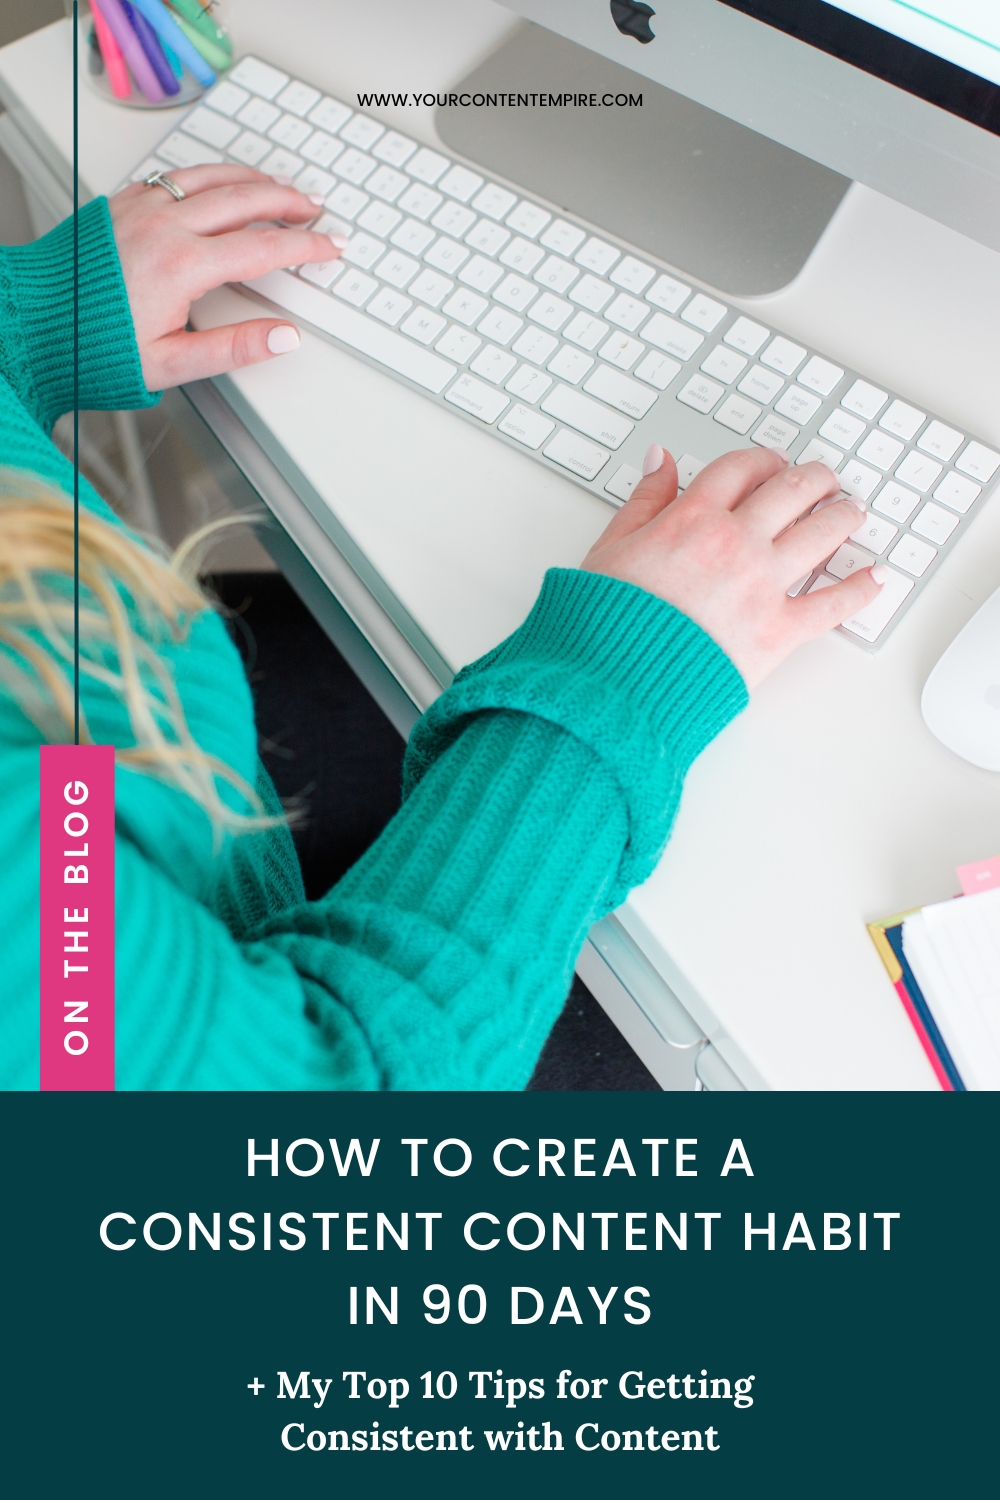 How to Create a Consistent Content Habit in 90 Days